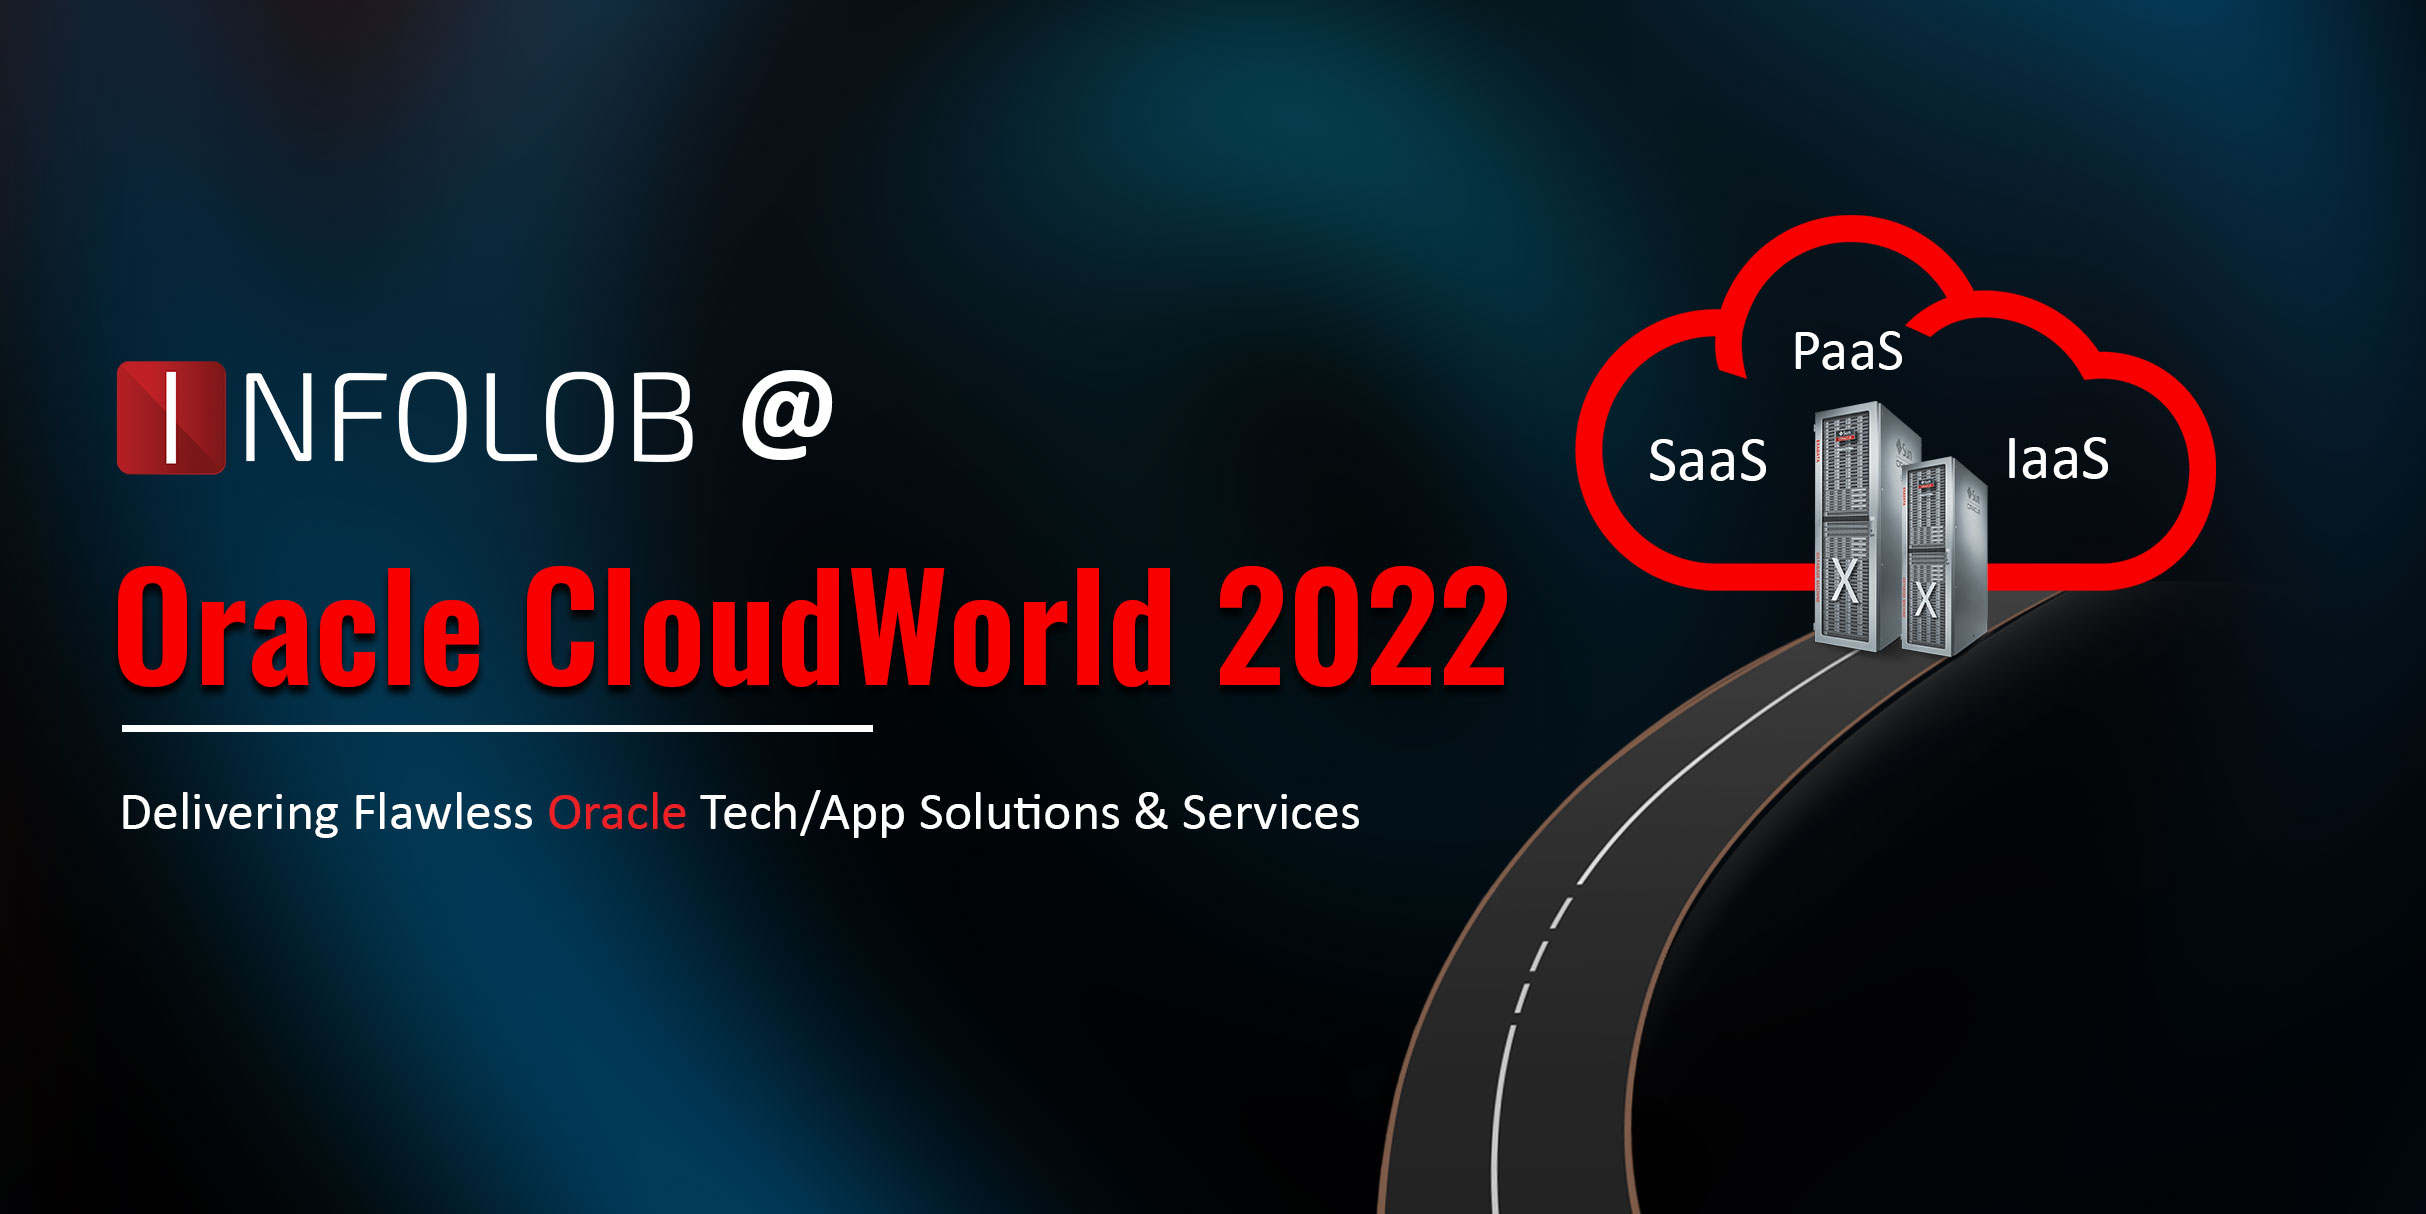 You are currently viewing Infolob @ Oracle CloudWorld 2022